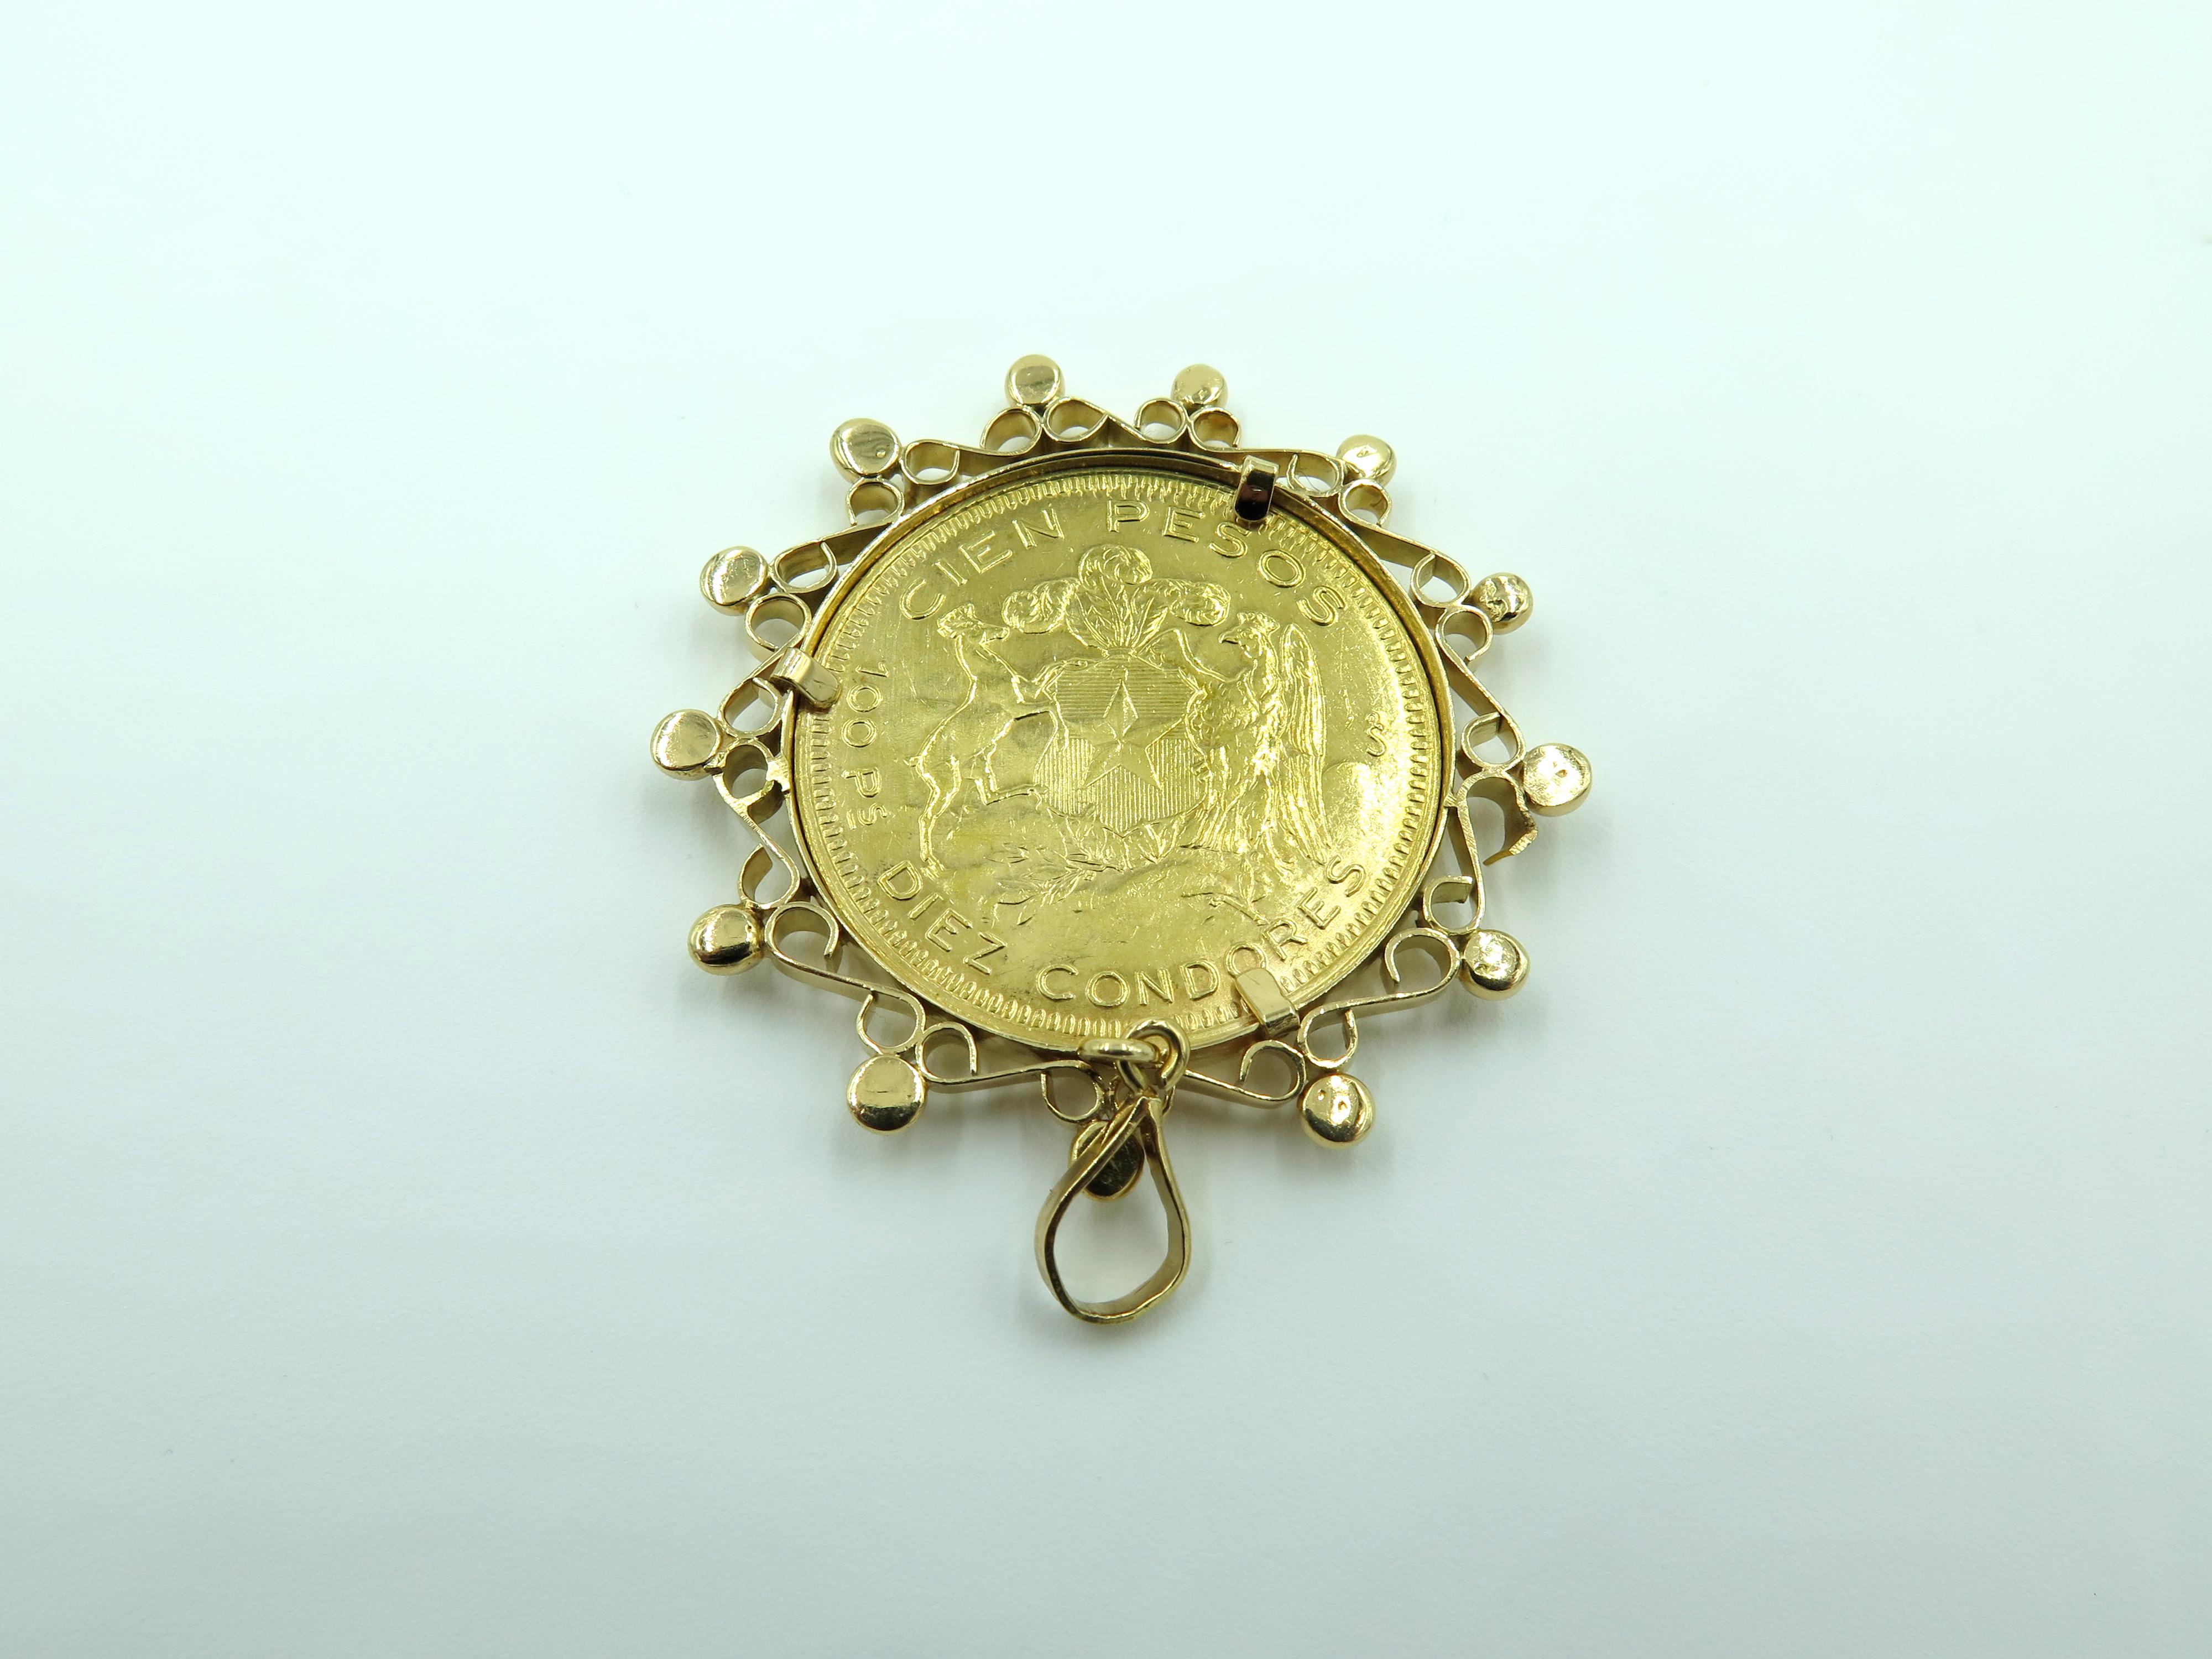 A 22 karat yellow gold Republica De Chile coin, pendant, dated 1946, within a scrolling and beaded 18 karat goold frame. Diameter is approximately 1 3/4 inches, gross weight is approximately 29.6 grams. 